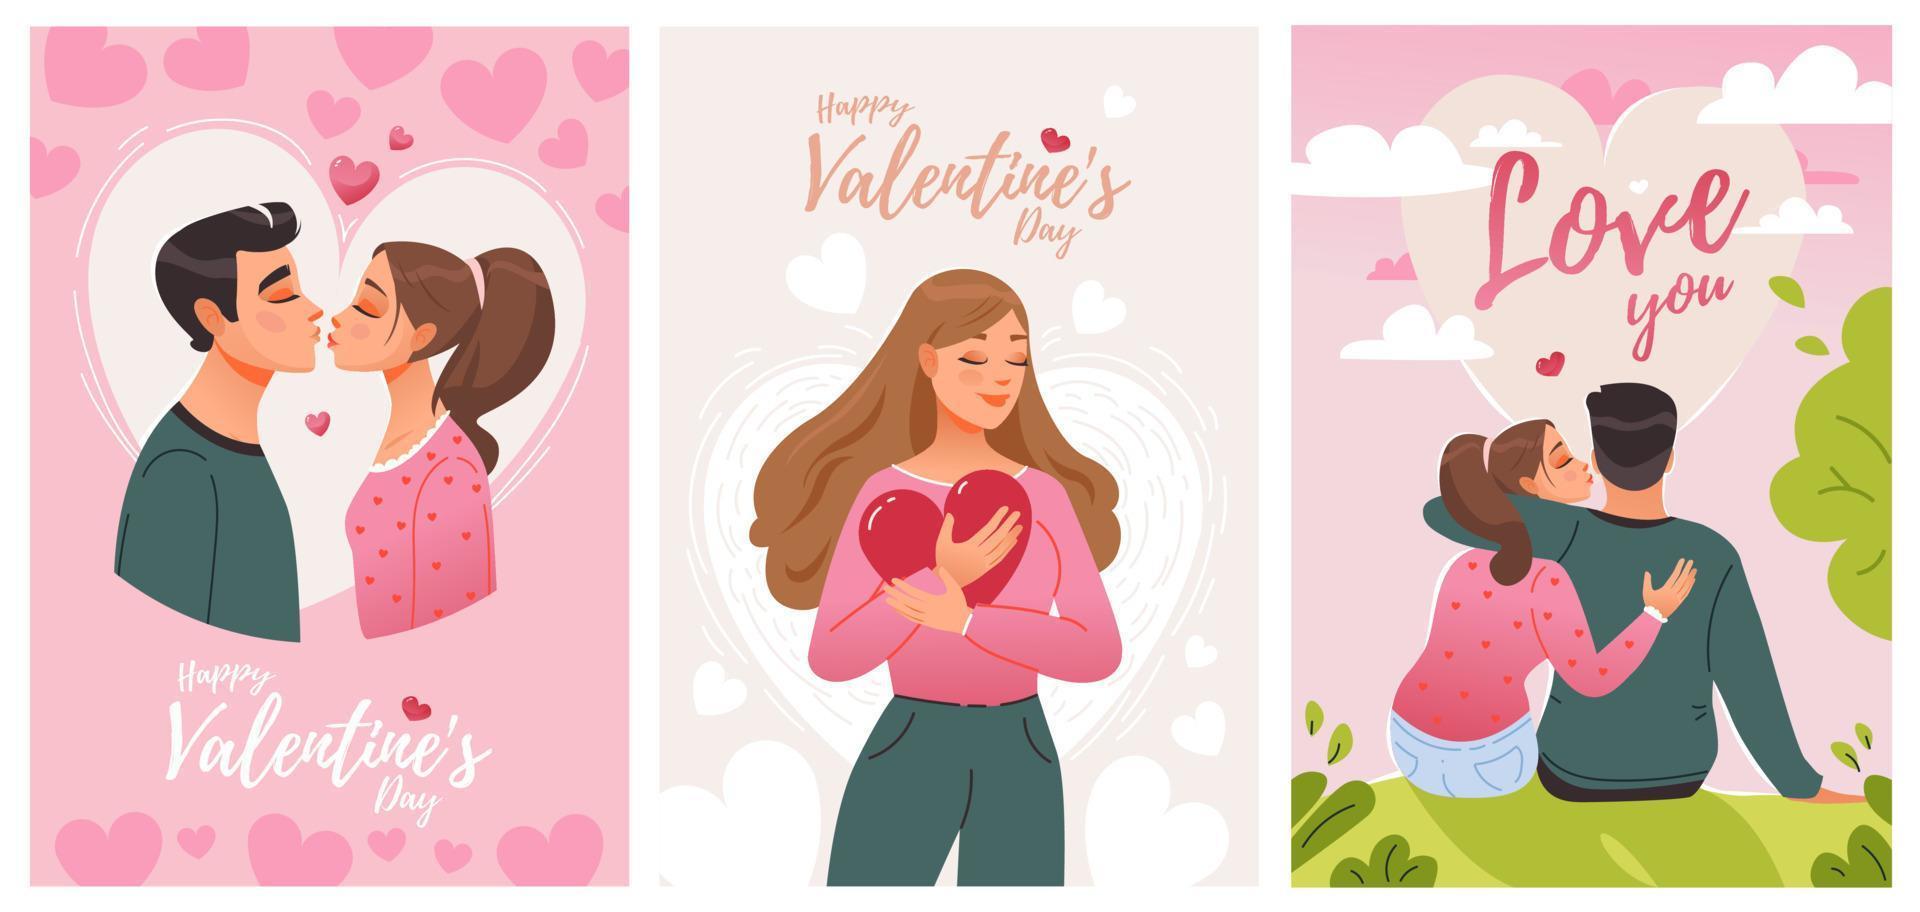 Valentine's day. A couple in love hugs and kisses. February 14. Cute cartoon vector illustration